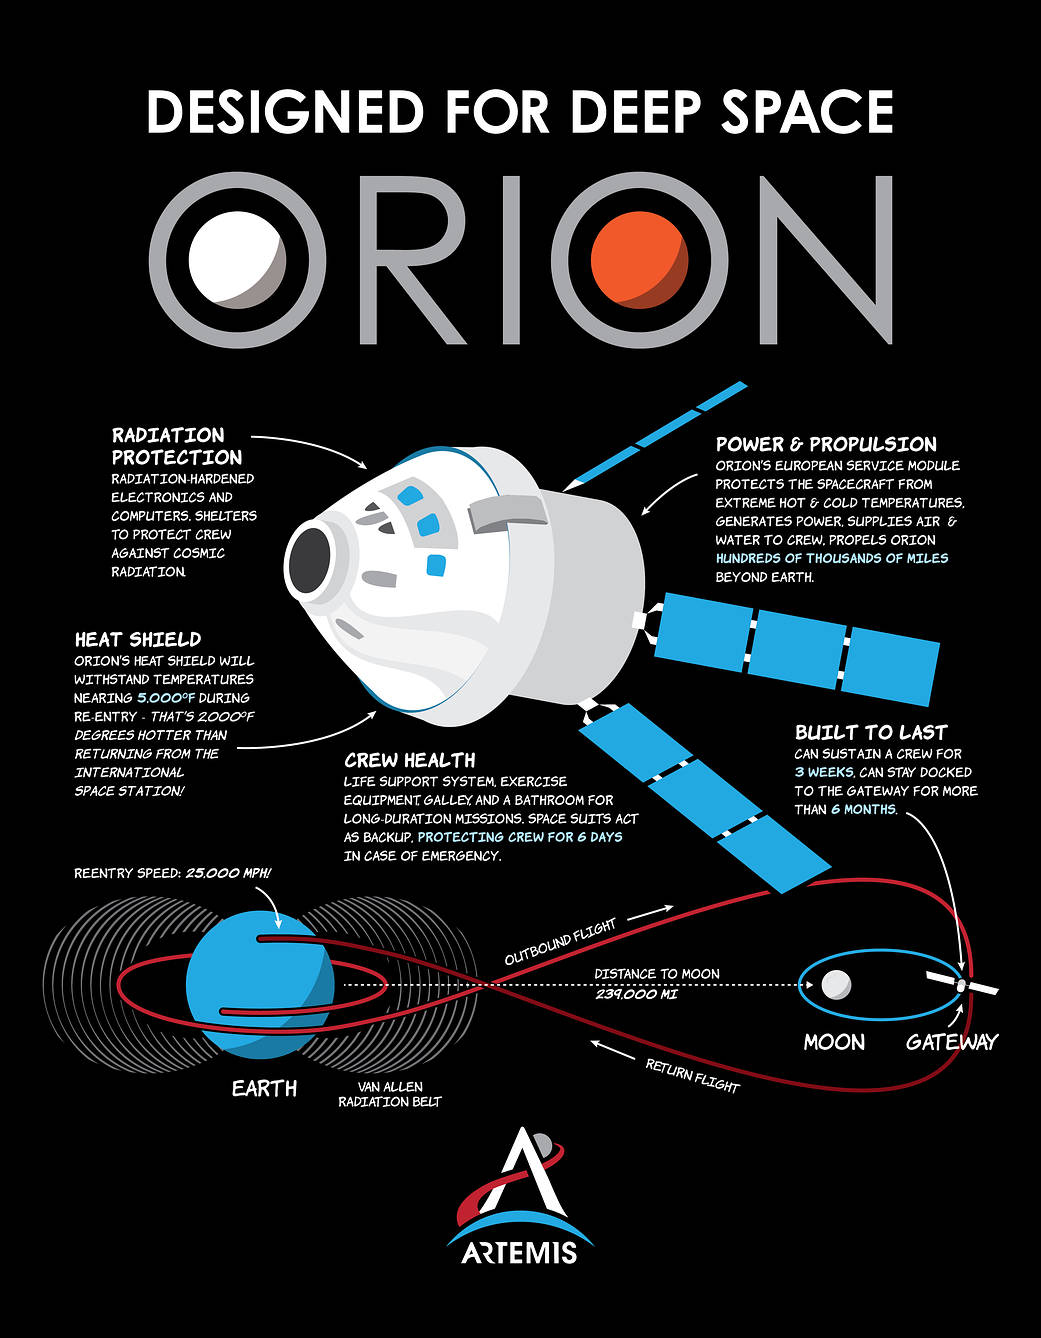 NASA plans on using the Orion capsule for deep space missions to Mars. https:/www.nasa.gov/image-feature/orion-capabilities-for-deep-space-enable-crewed-artemis-moon-missions; 